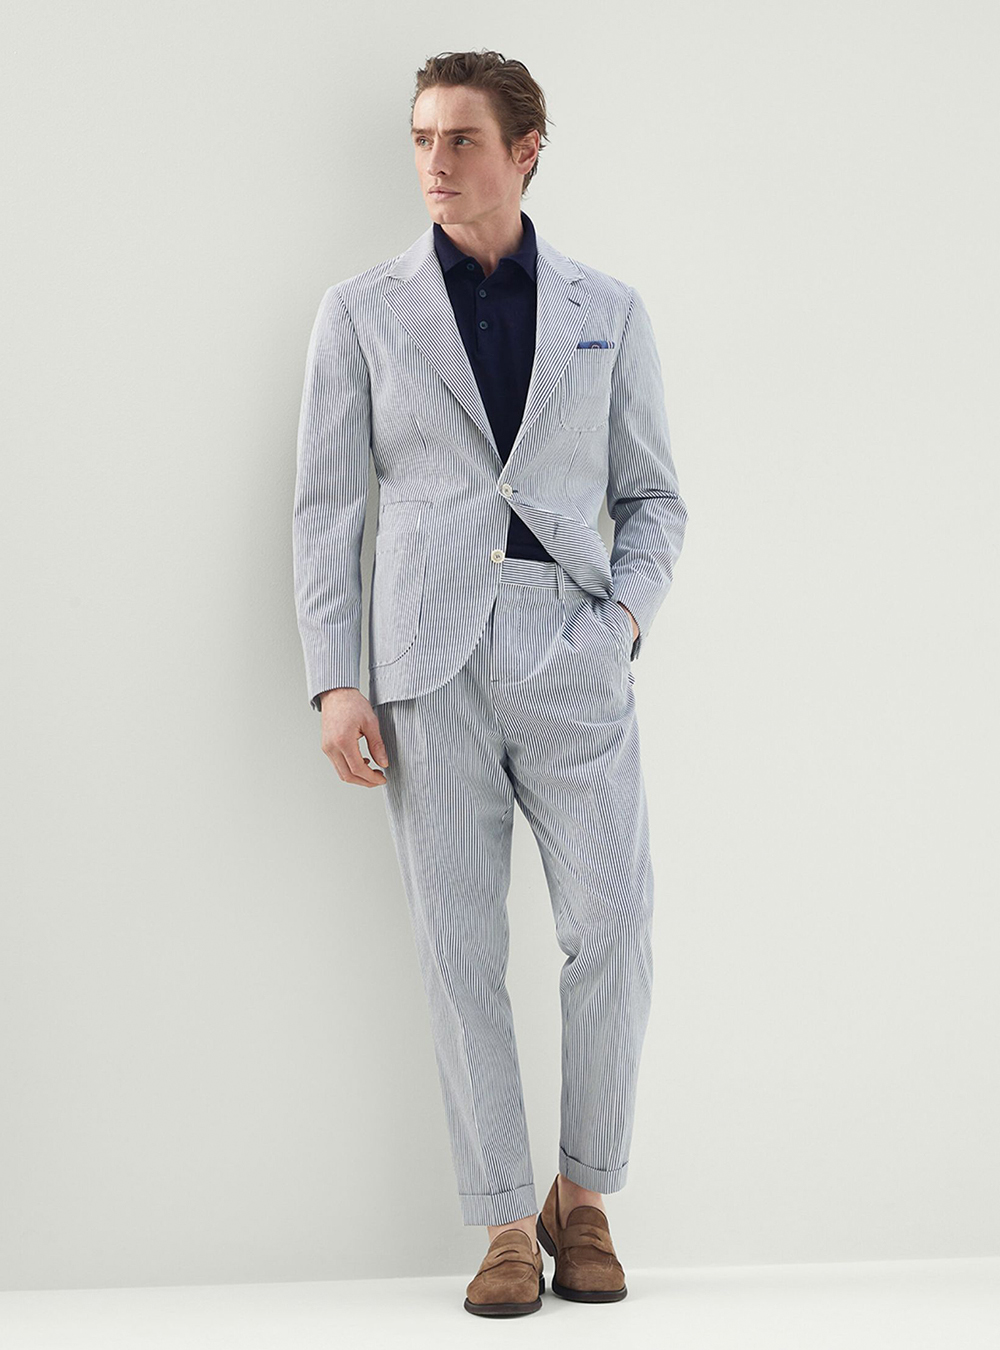 light grey seersucker suit, navy polo t-shirt, and brown suede loafers